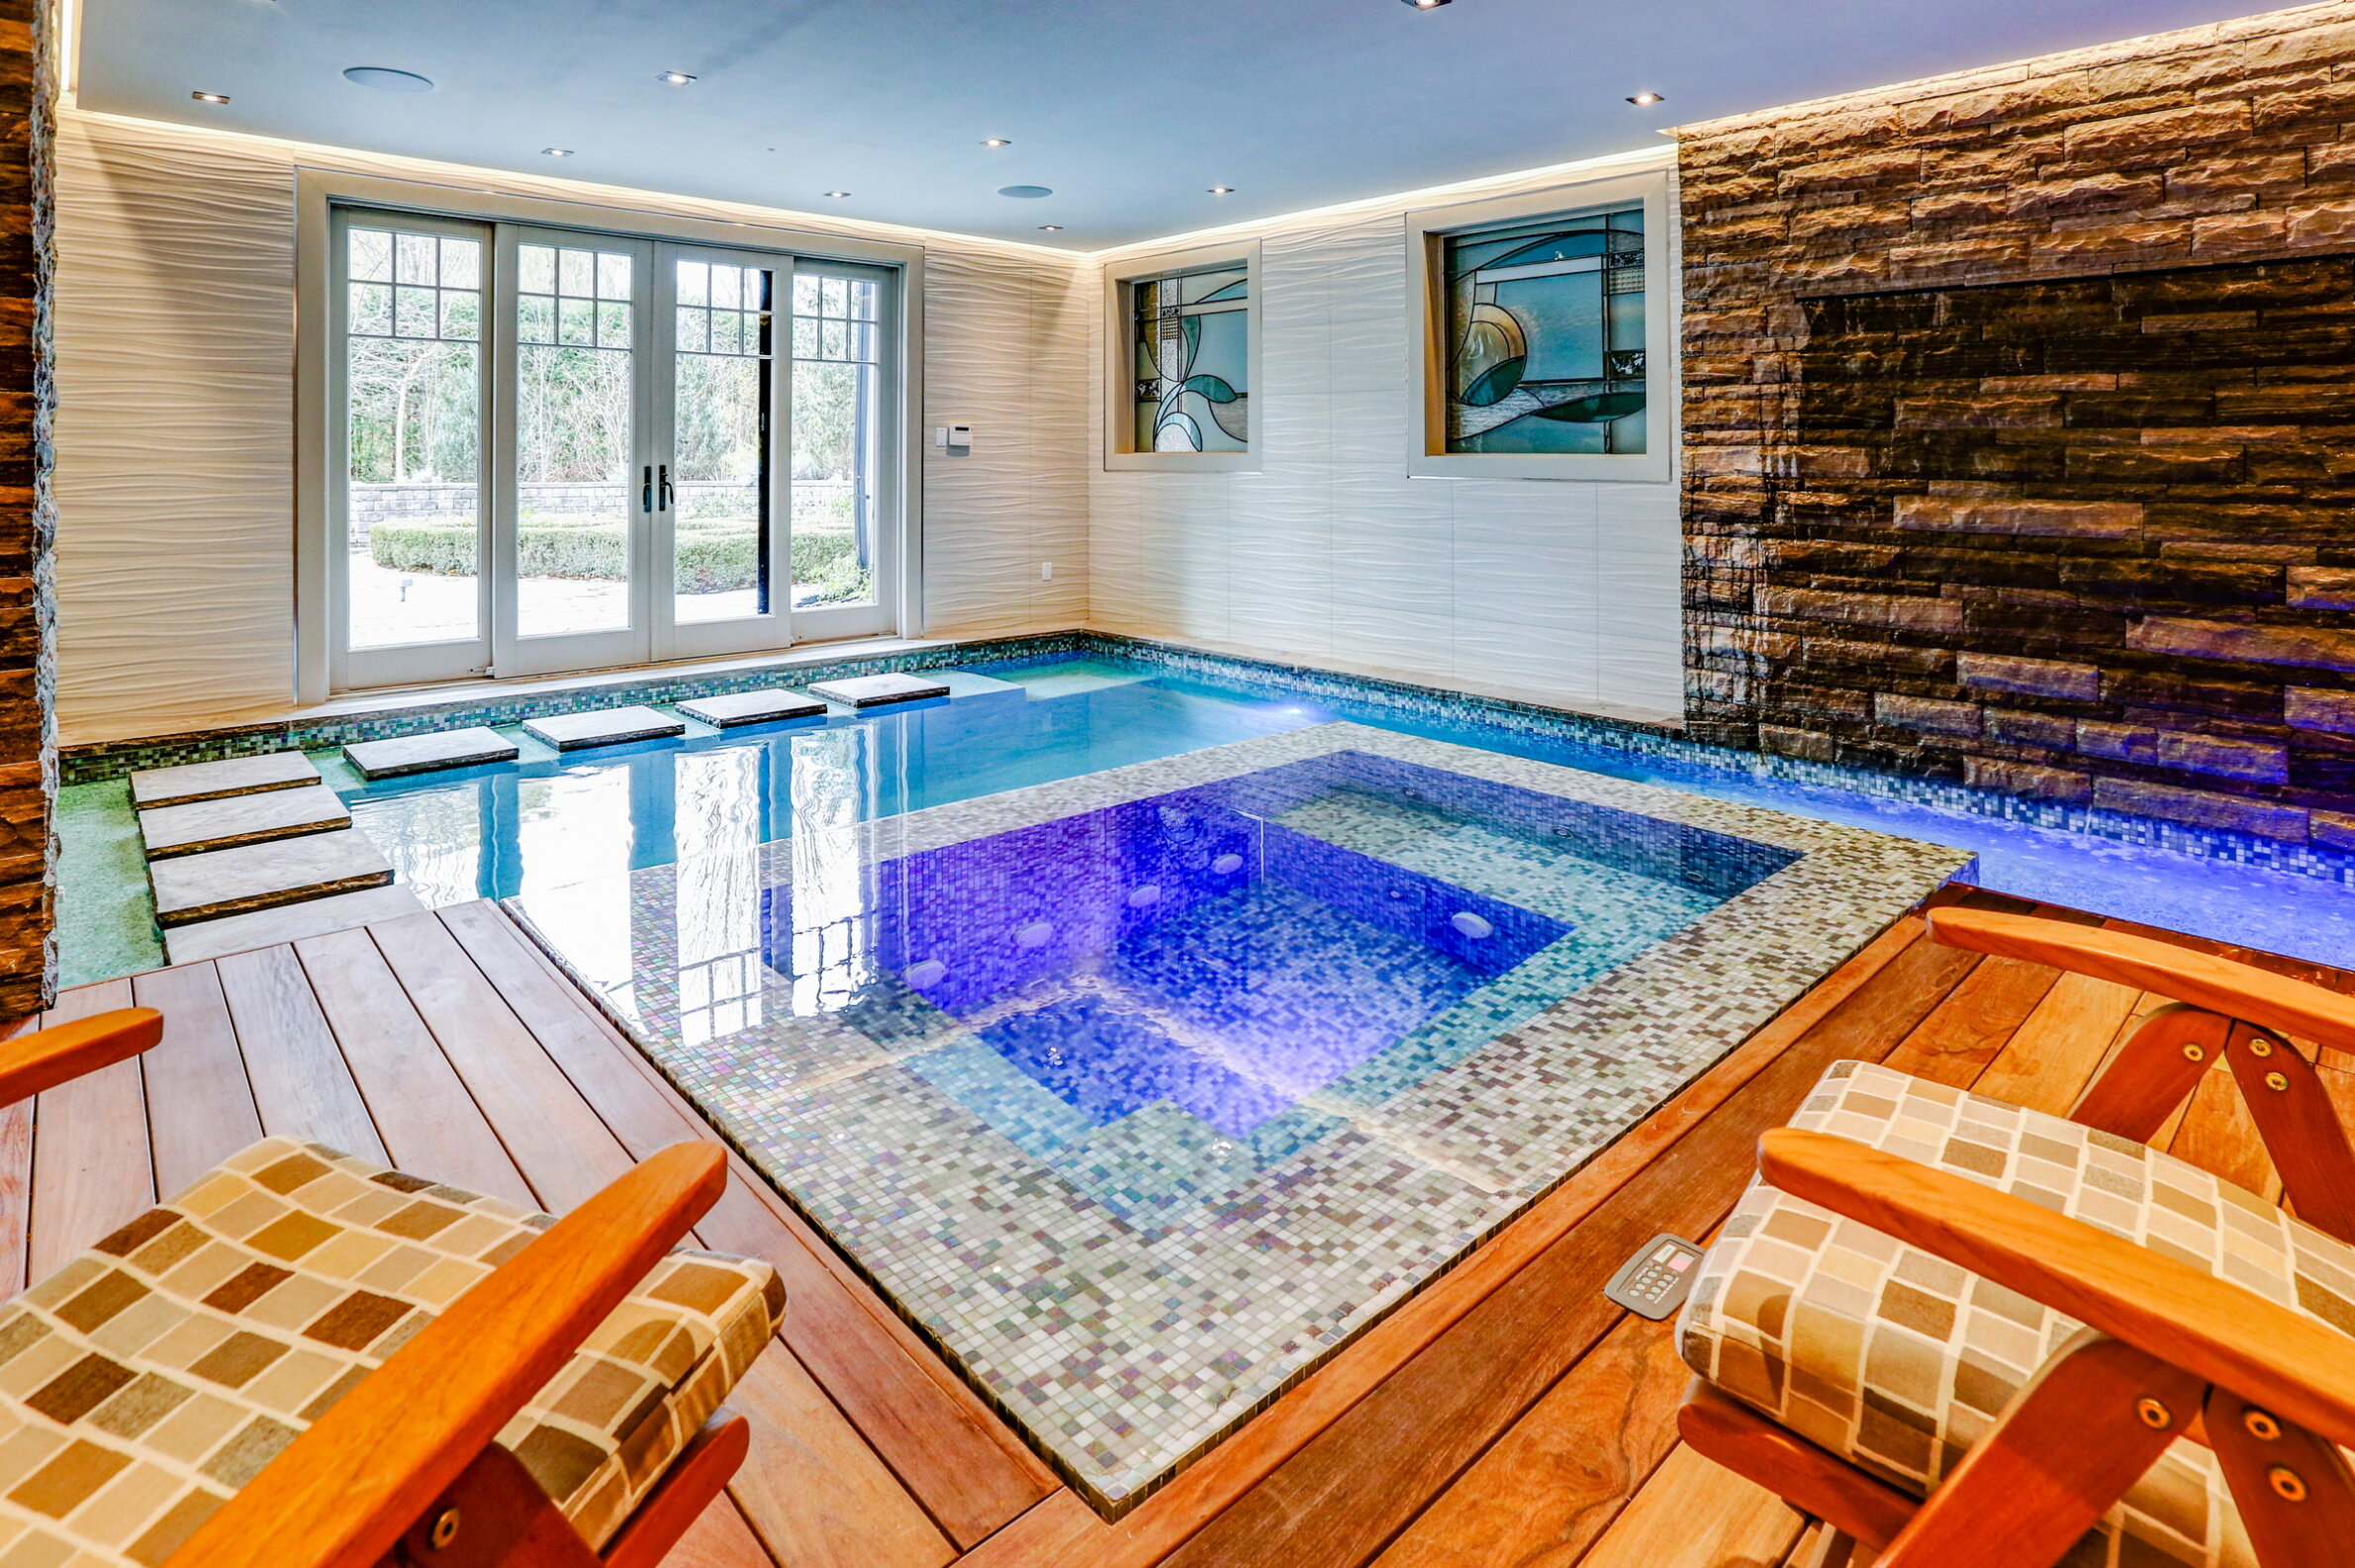 An indoor swimming pool with mosaic tiles, wooden decking, and loungers. Natural light streams in; a stone feature wall and art add elegance.